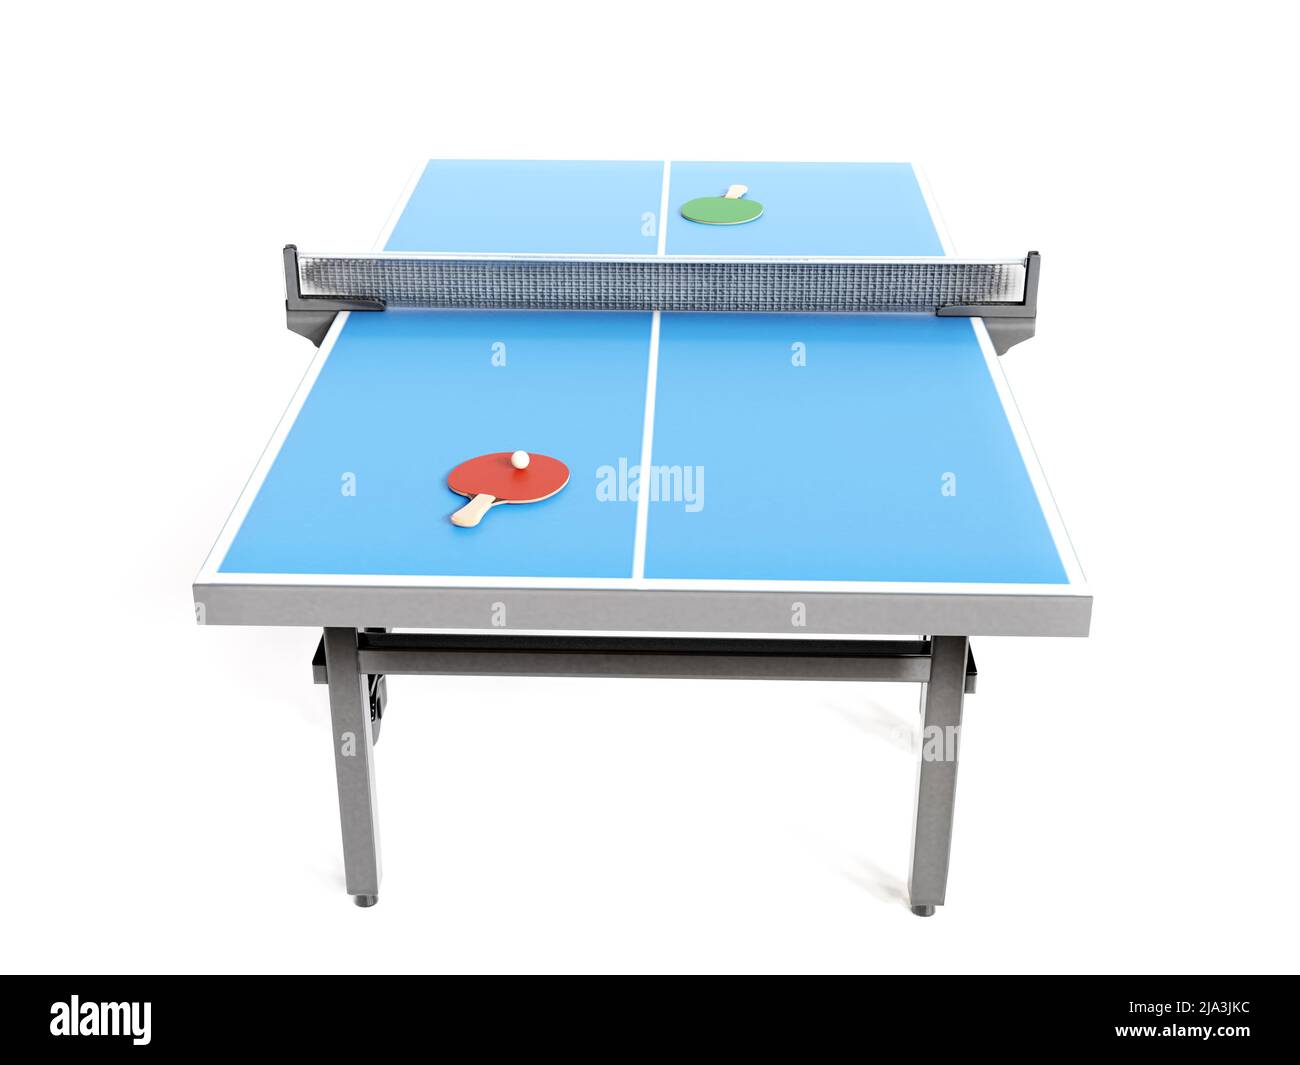 3D rendering of blue ping-pong table with red and green paddles and ball Stock Photo